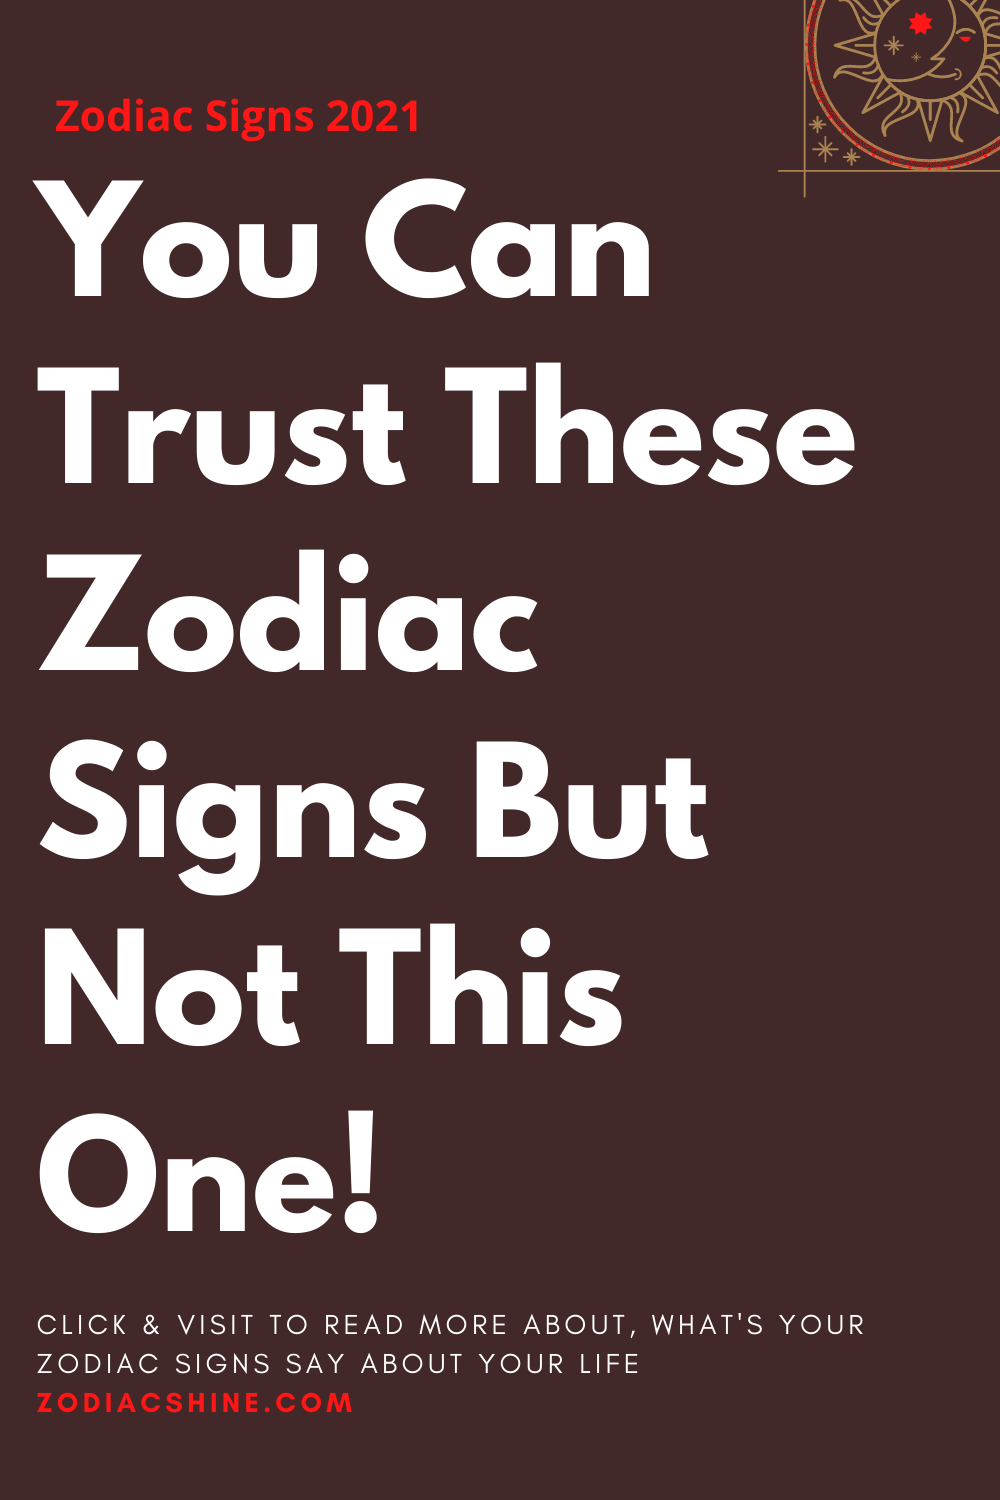 You Can Trust These Zodiac Signs But Not This One!